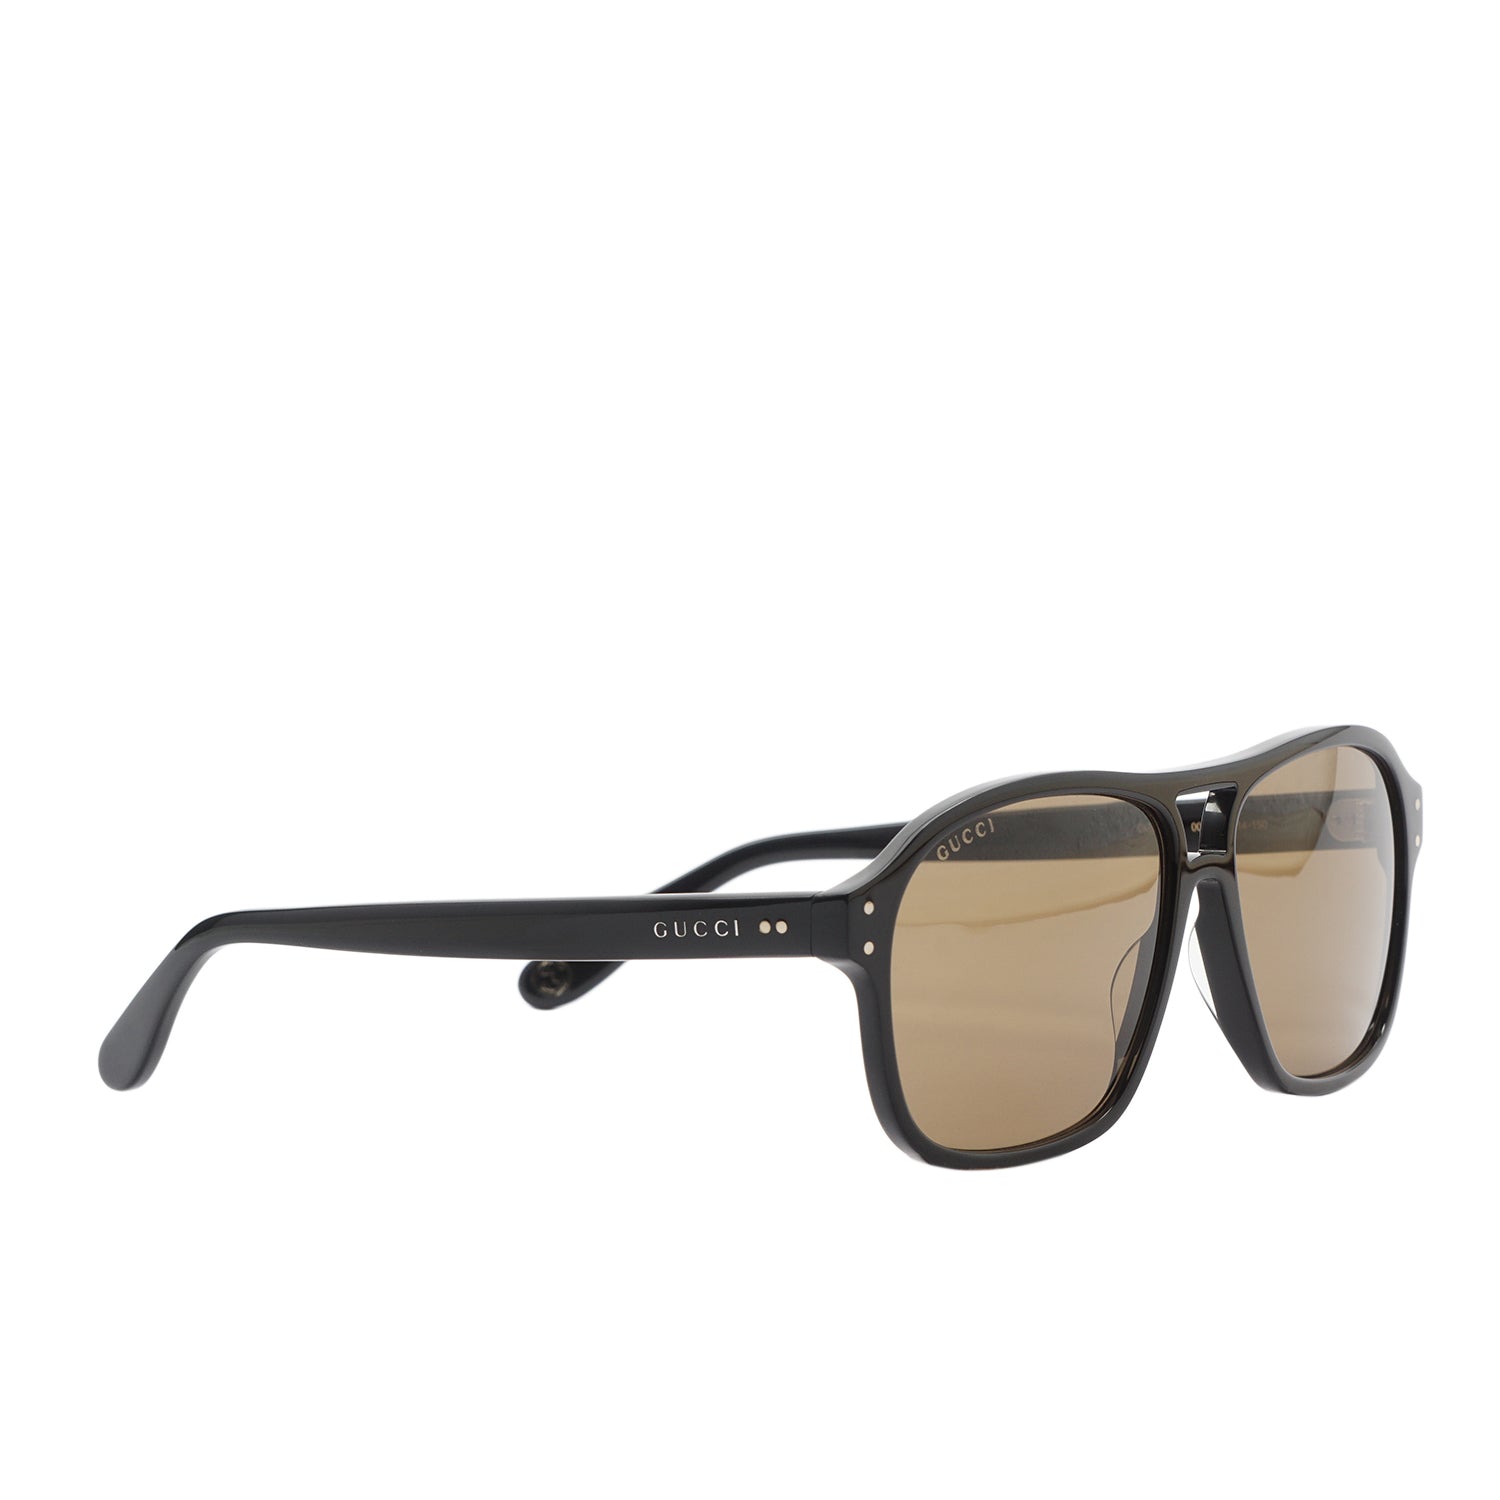 GUCCI BLACK FRAME WITH BROWN LENS